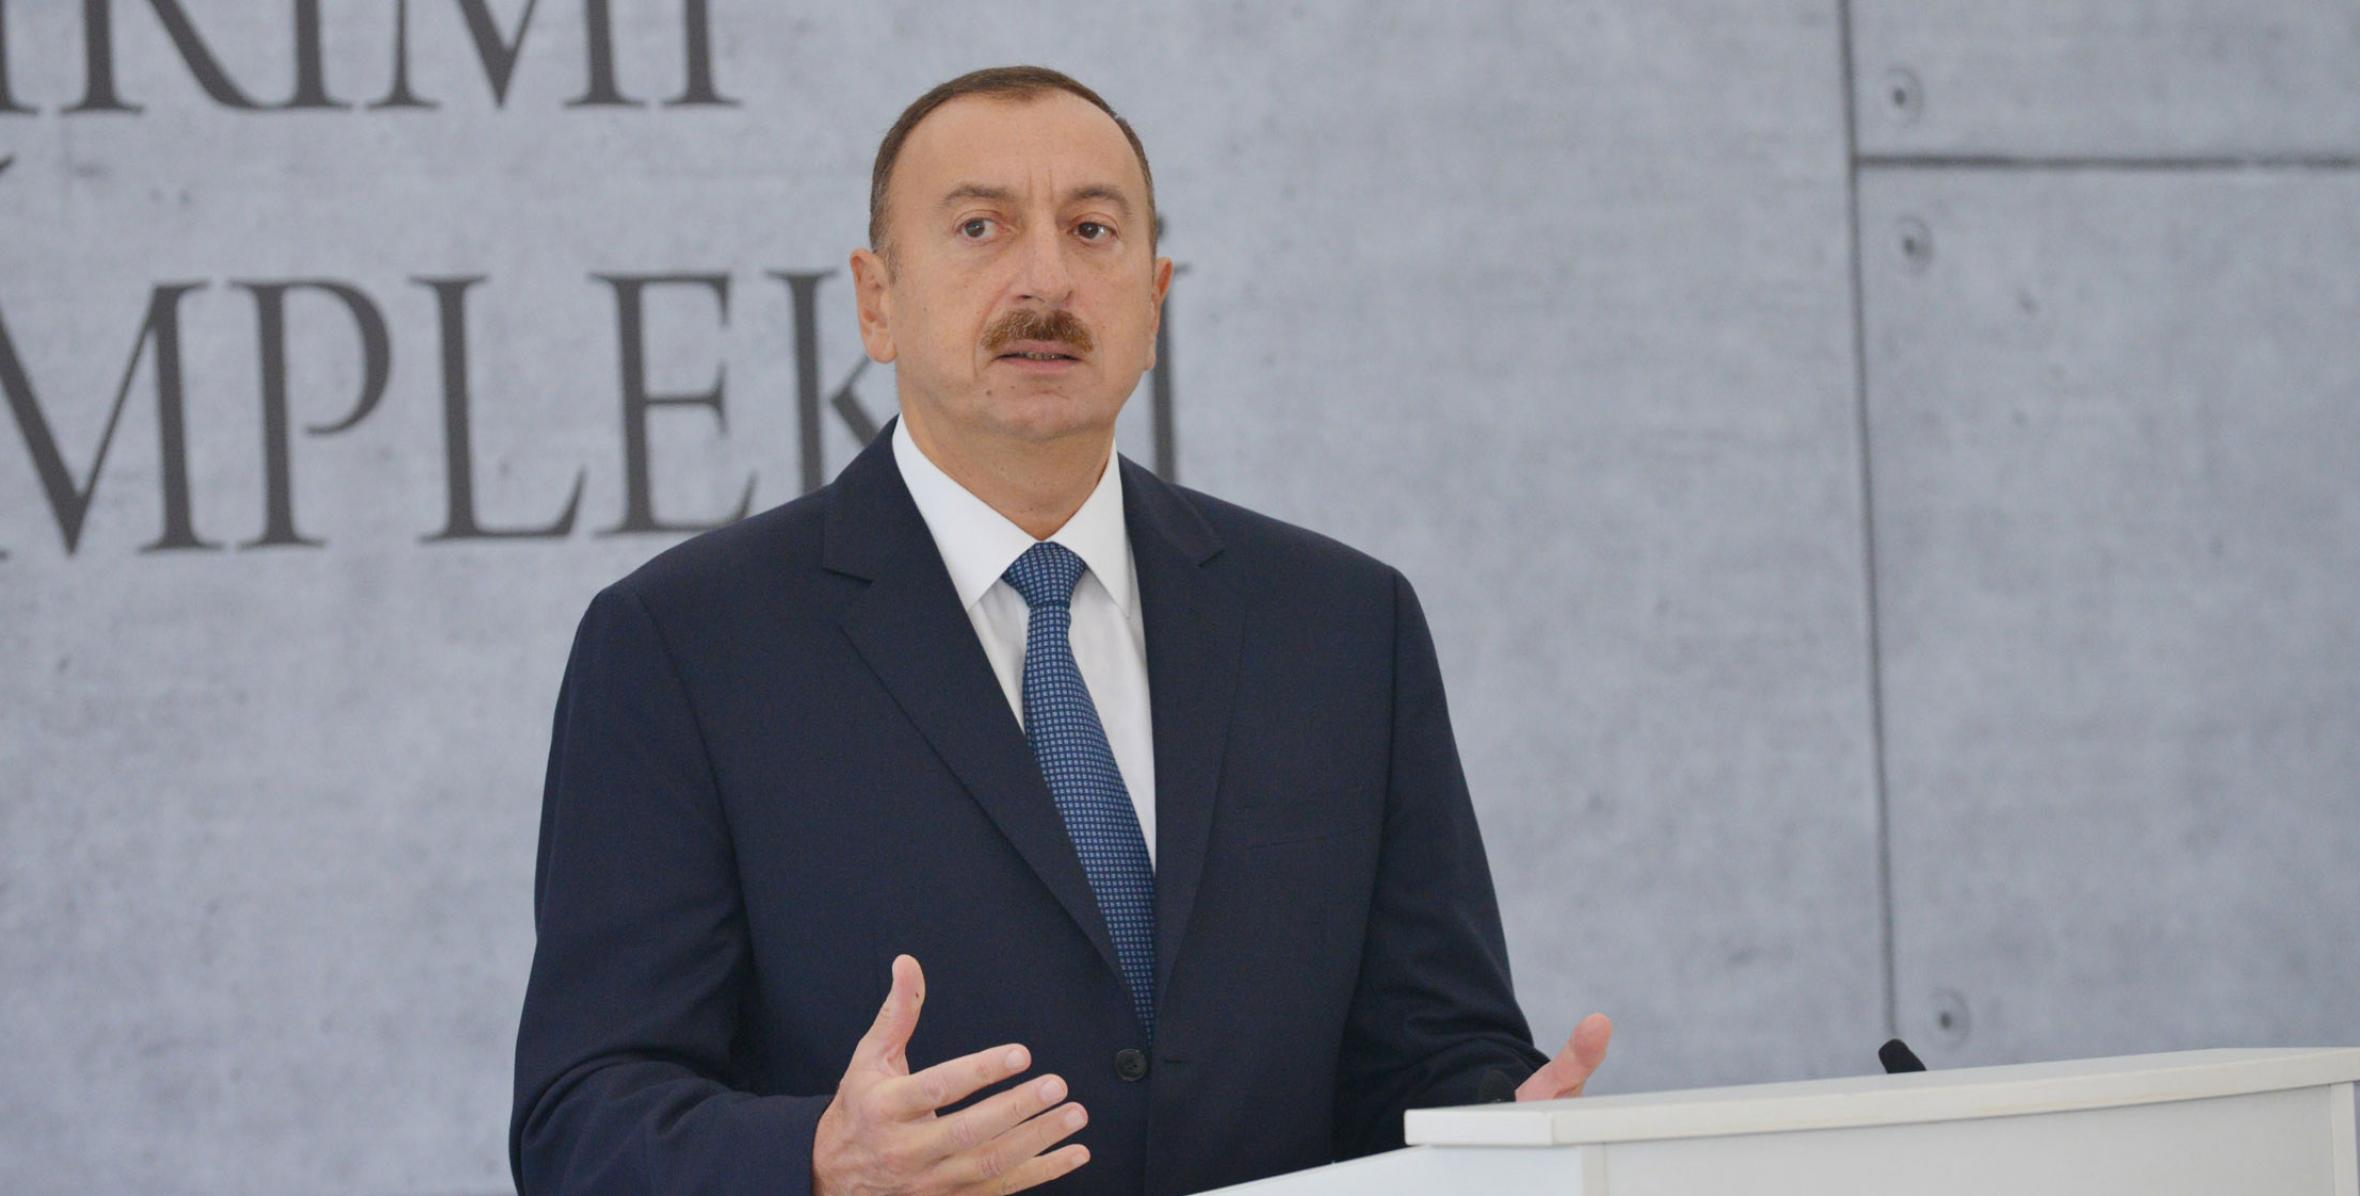 Speech by Ilham Aliyev at the opening of the Guba genocide memorial established with the support of the Heydar Aliyev Foundation